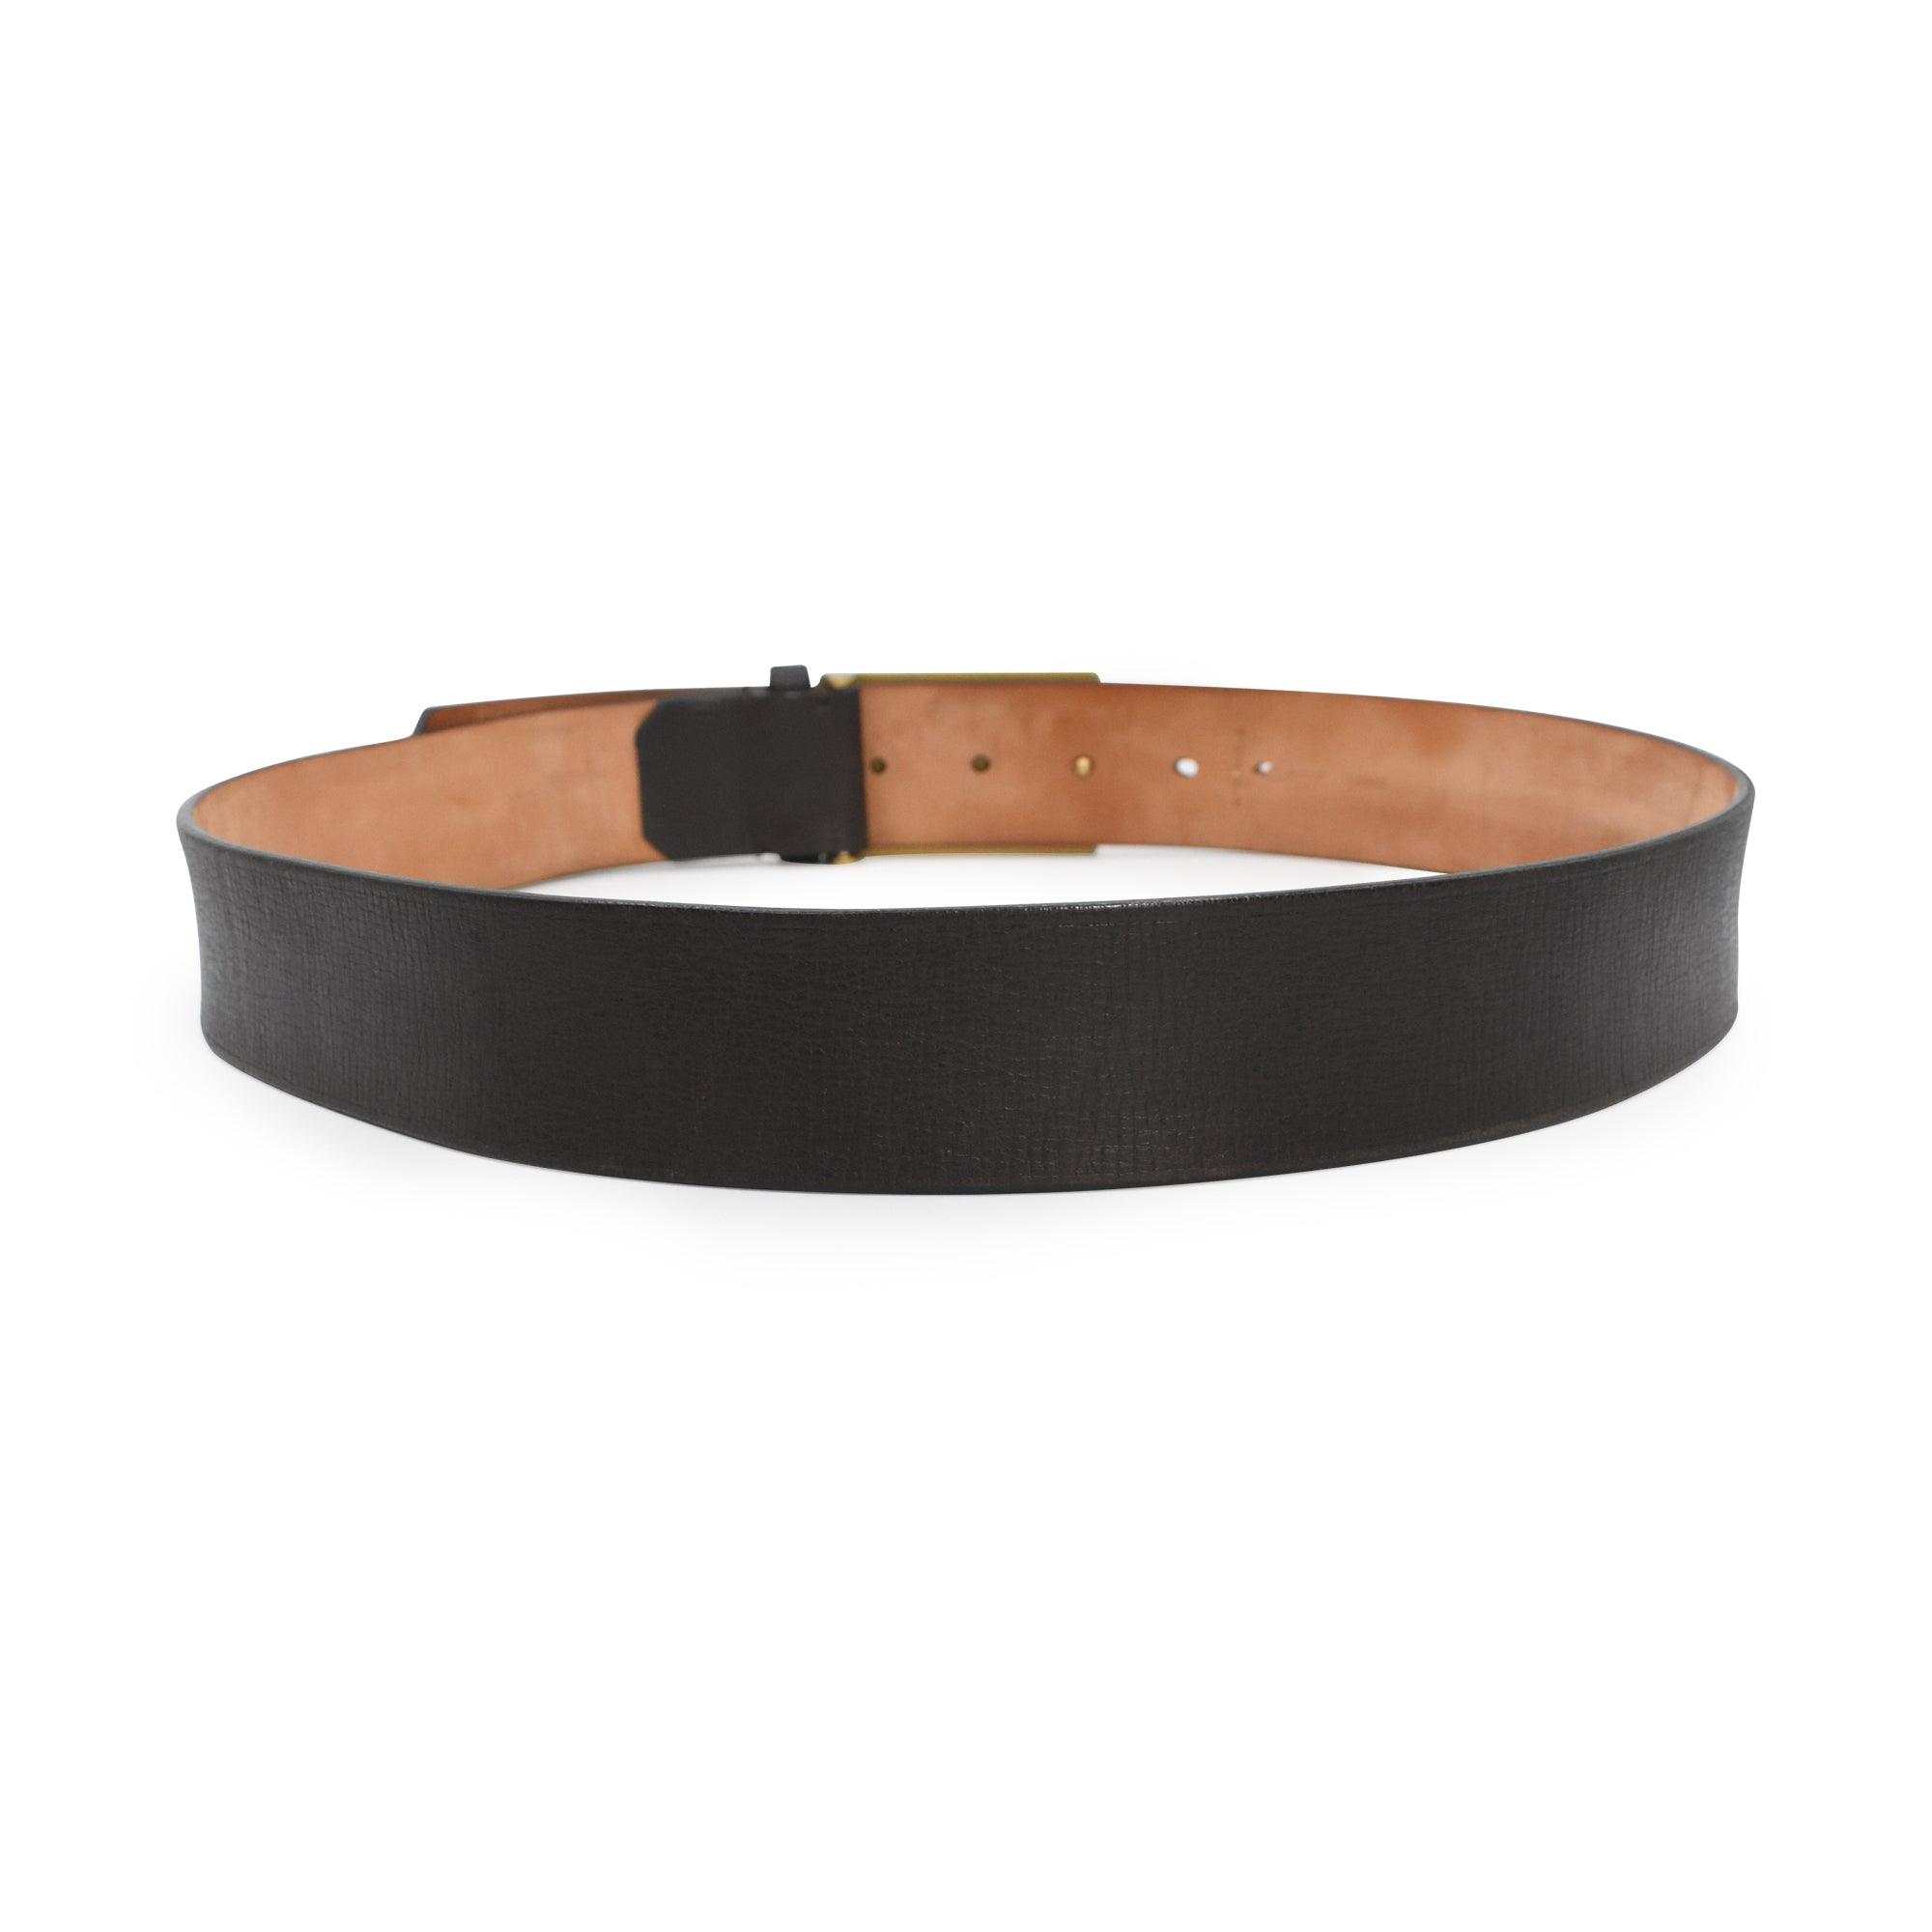 Louis Vuitton Belt - 90/36 - Fashionably Yours